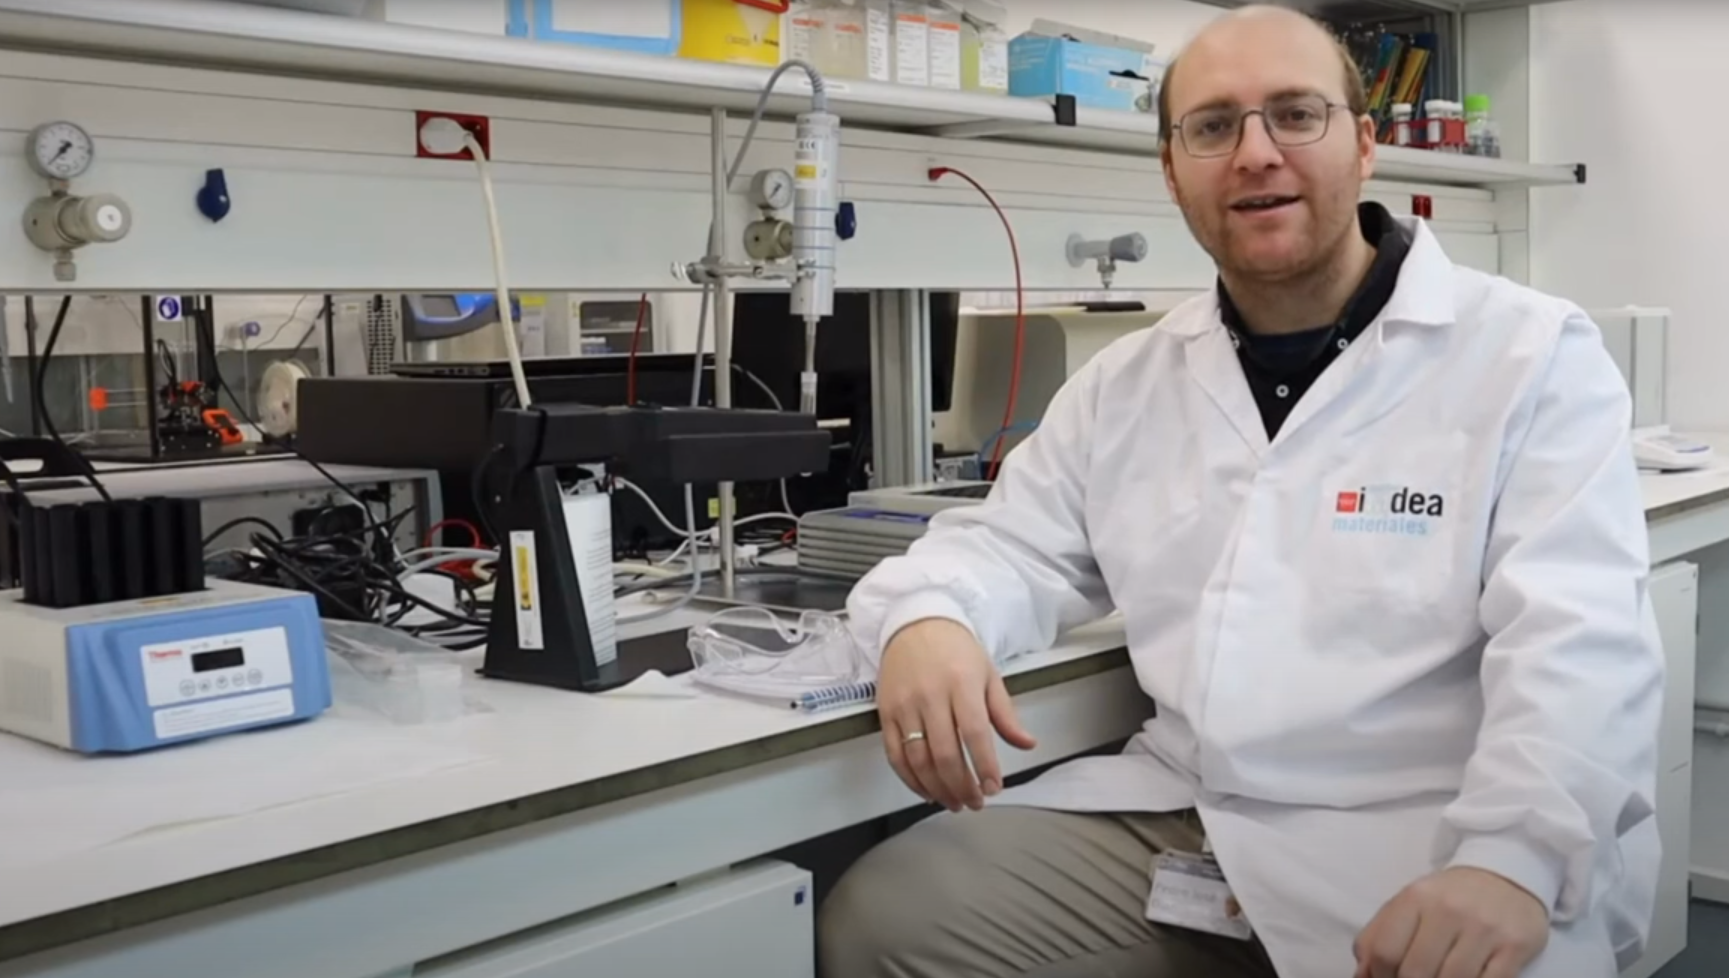 Get to know IMDEA Materials researcher with Dr. Pedro Díaz Payno